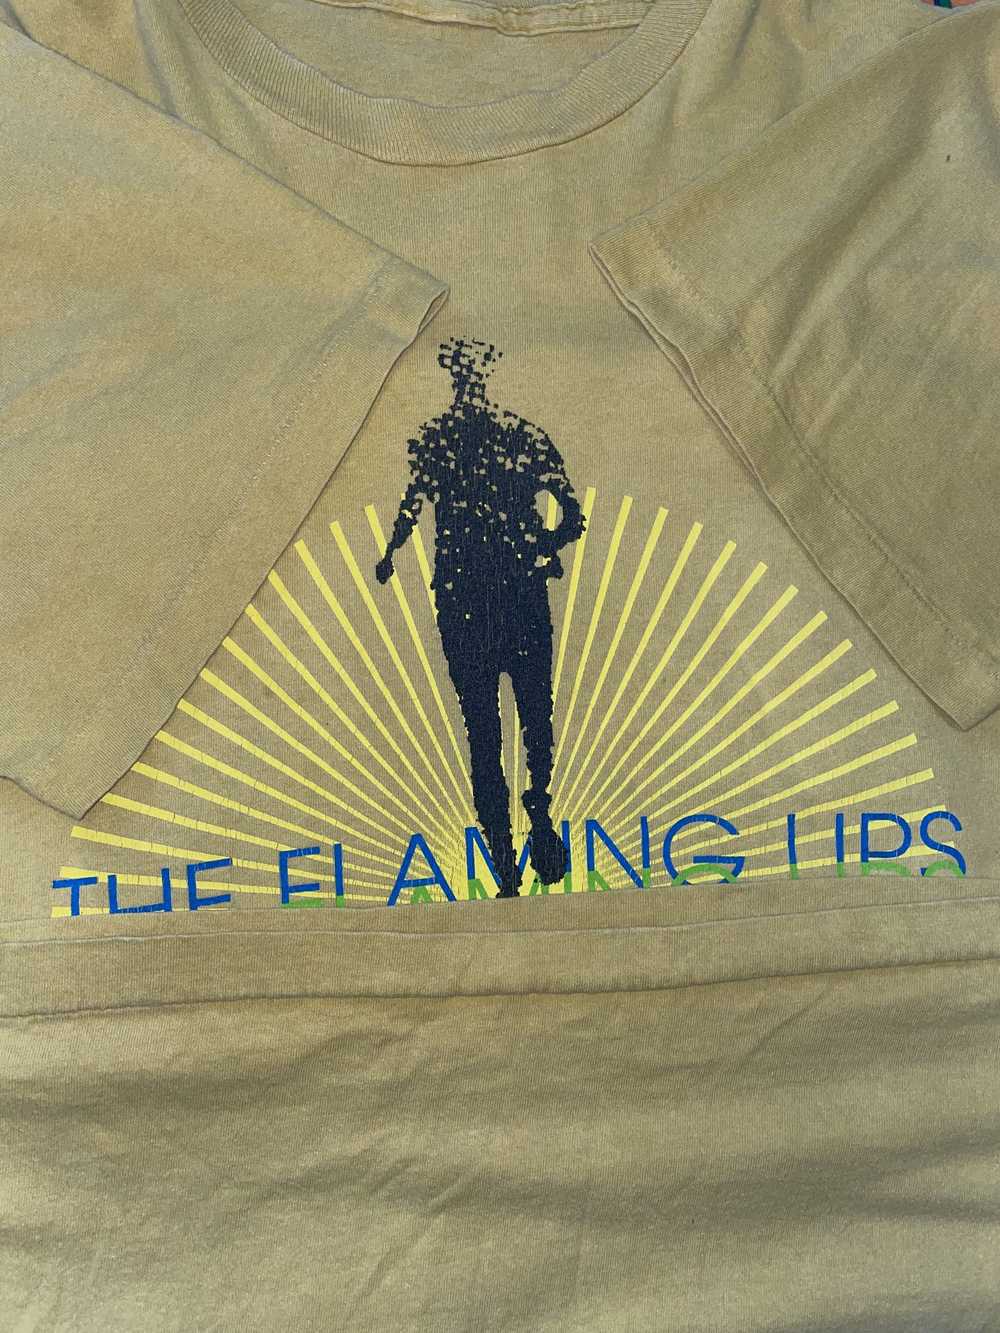 1999 The Flaming Lips tour tee - image 4